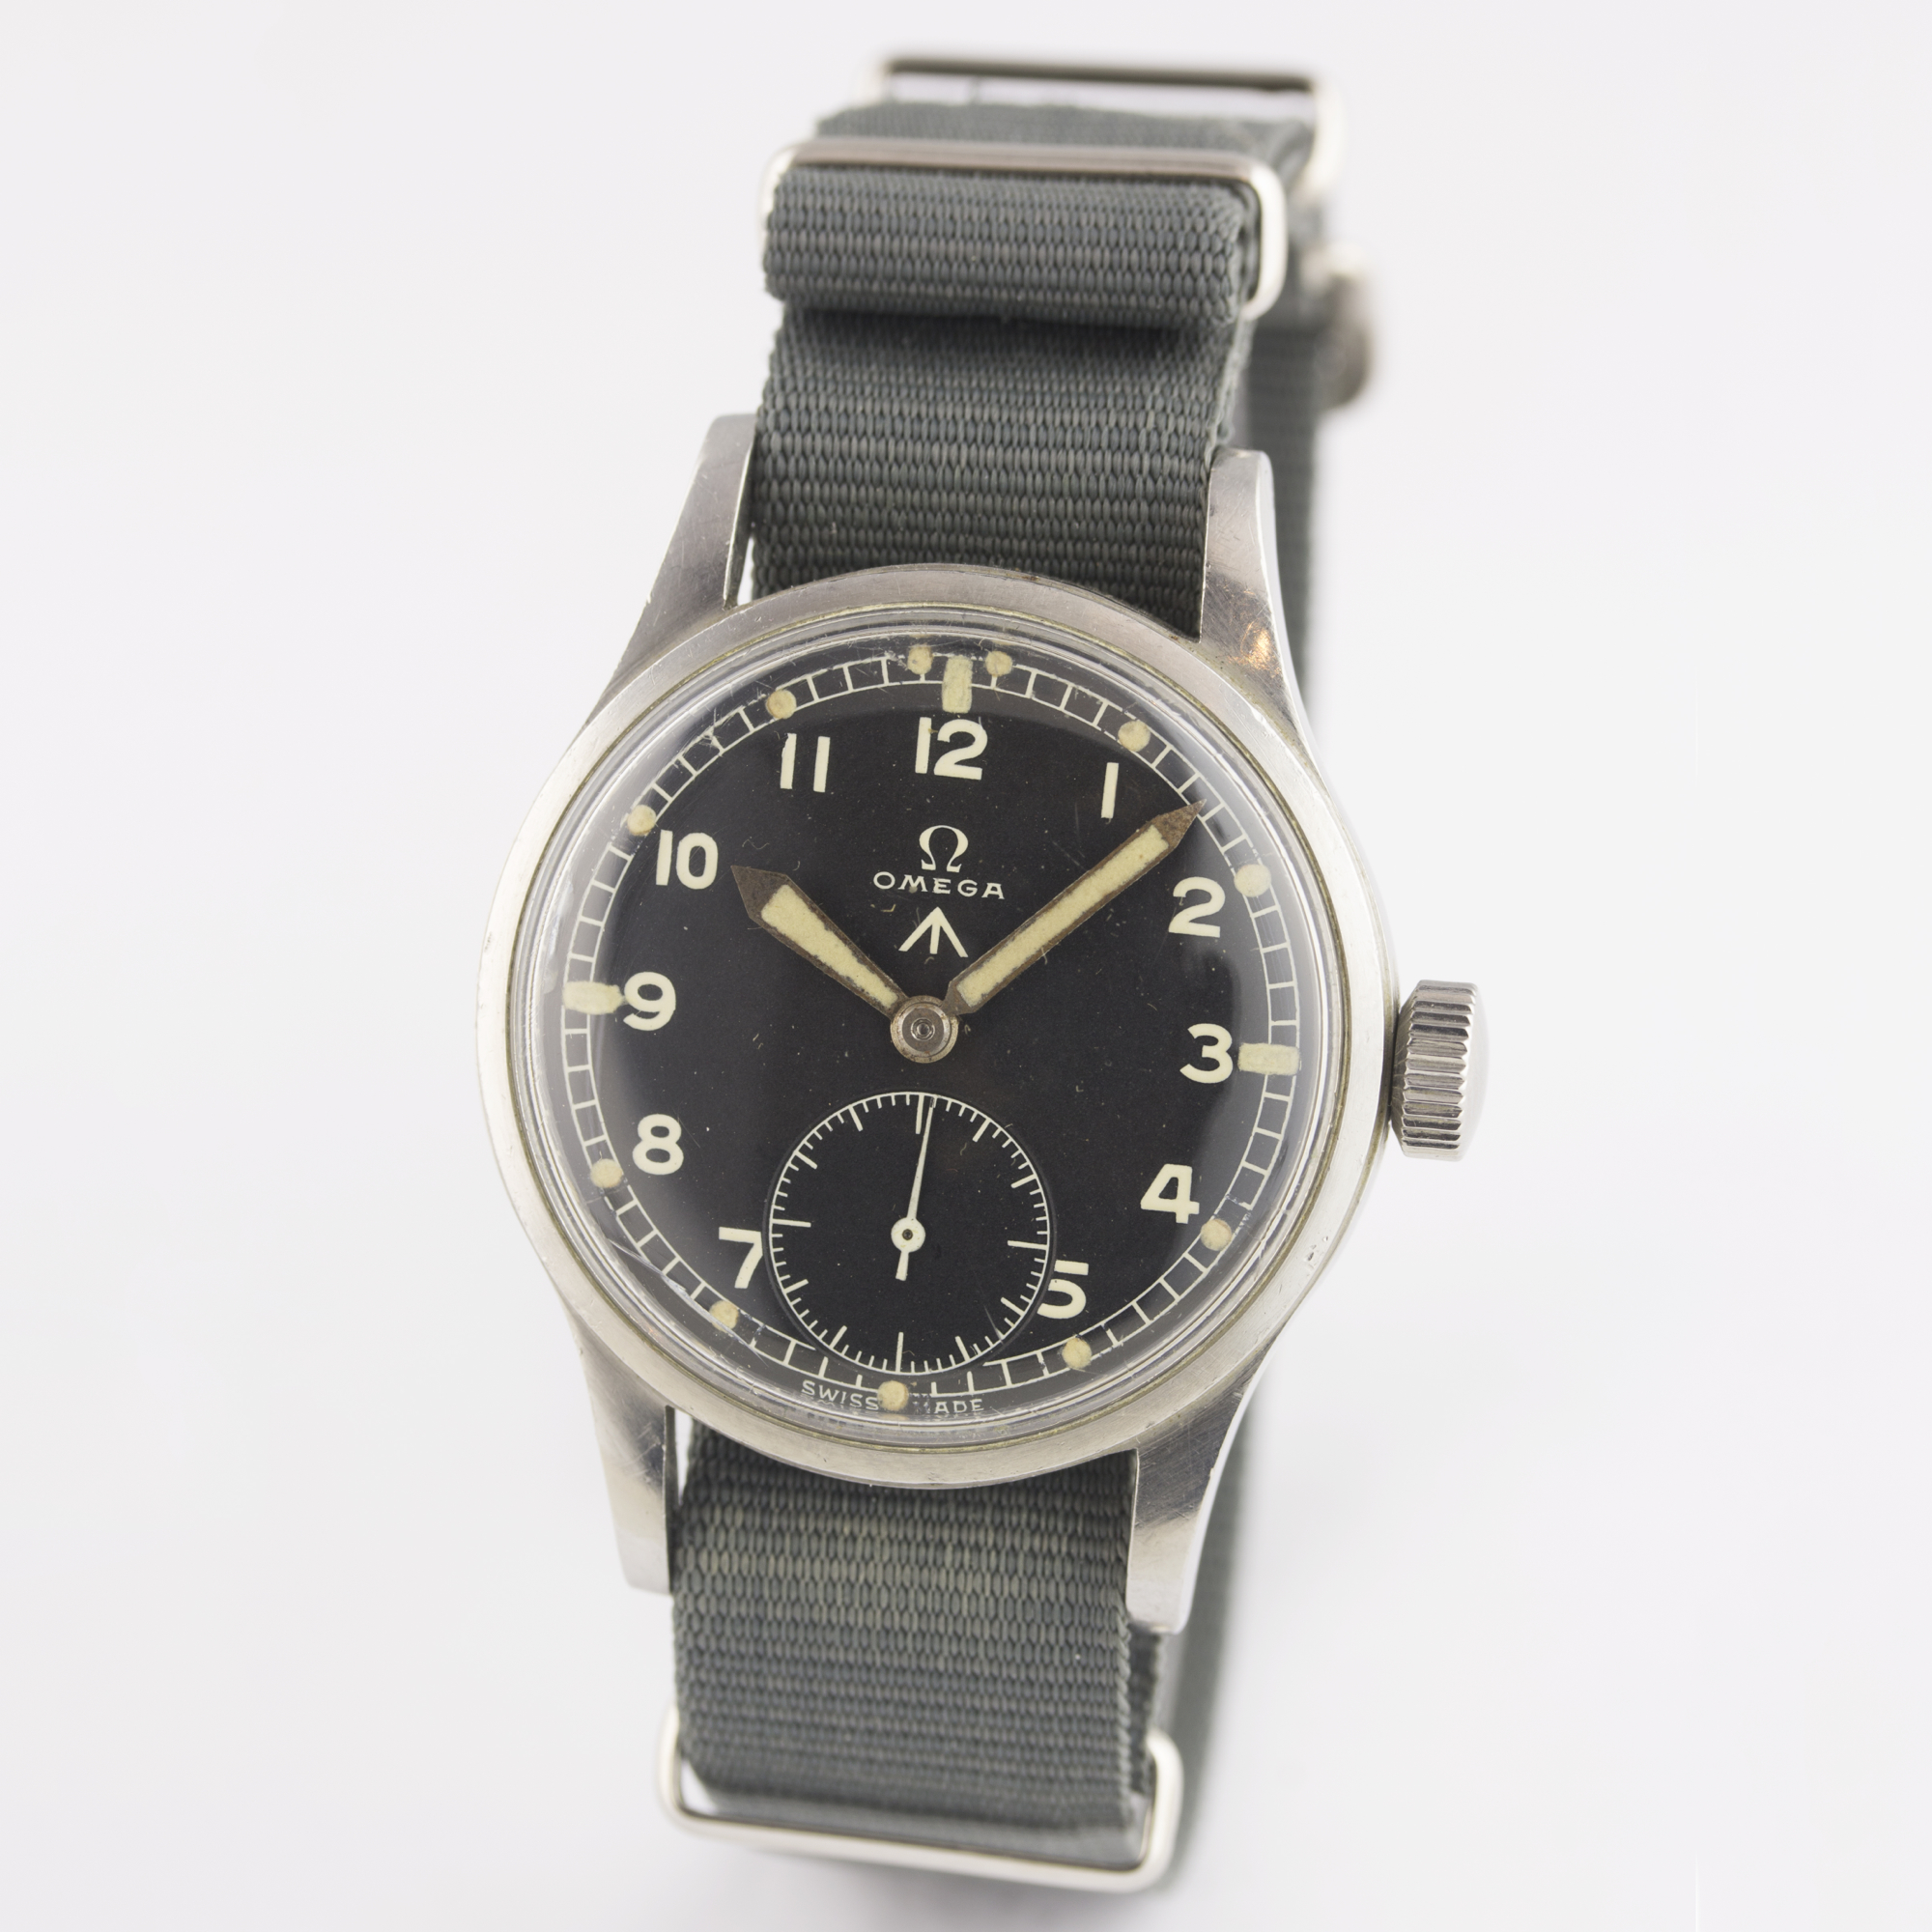 A GENTLEMAN'S STAINLESS STEEL BRITISH MILITARY OMEGA W.W.W. WRIST WATCH CIRCA 1947, PART OF THE " - Image 2 of 8